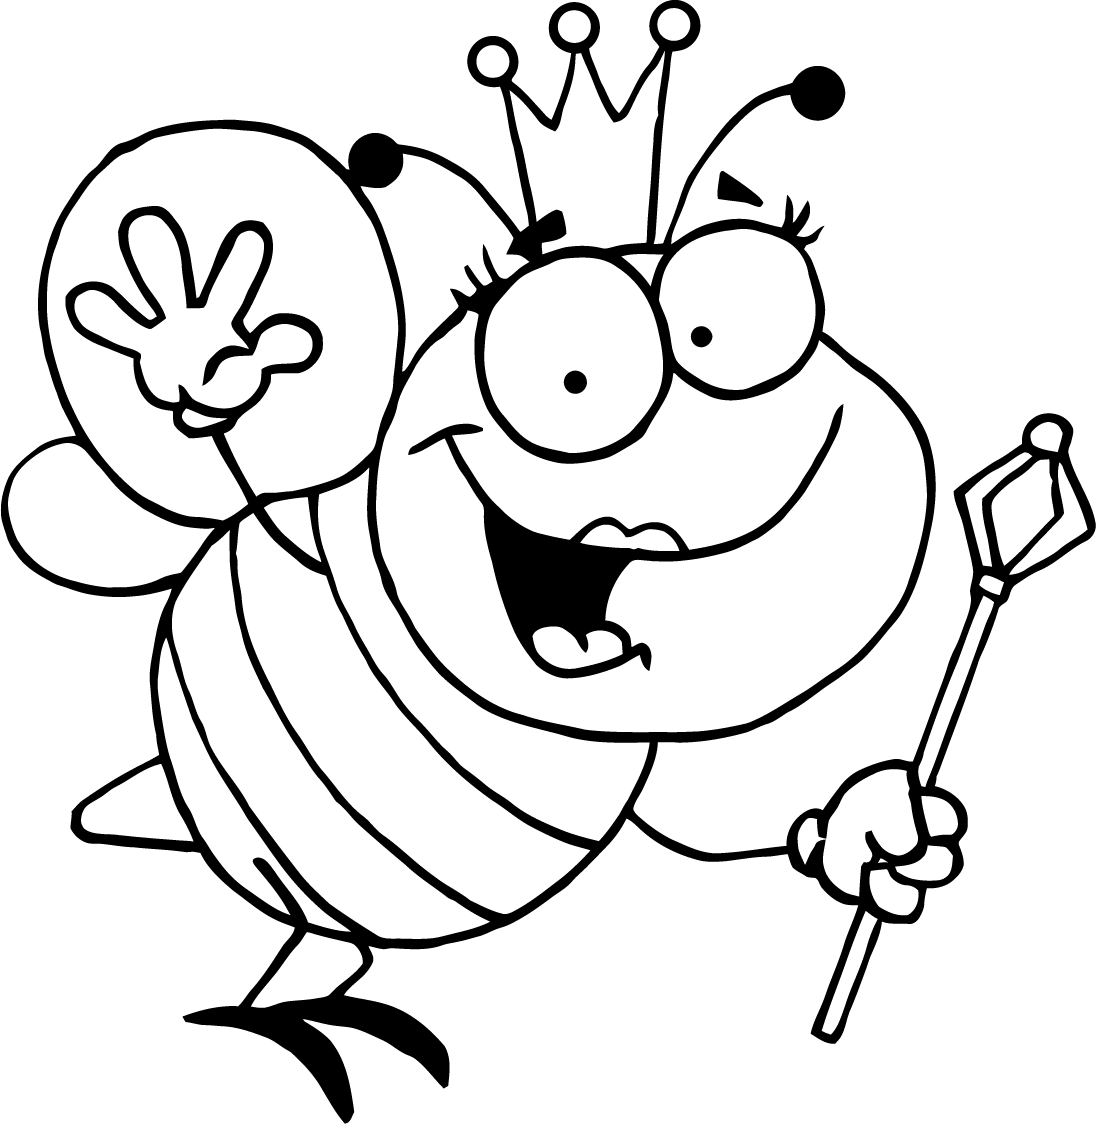 Bumble Bee Coloring Sheets Free Cliparts That You Can Download To